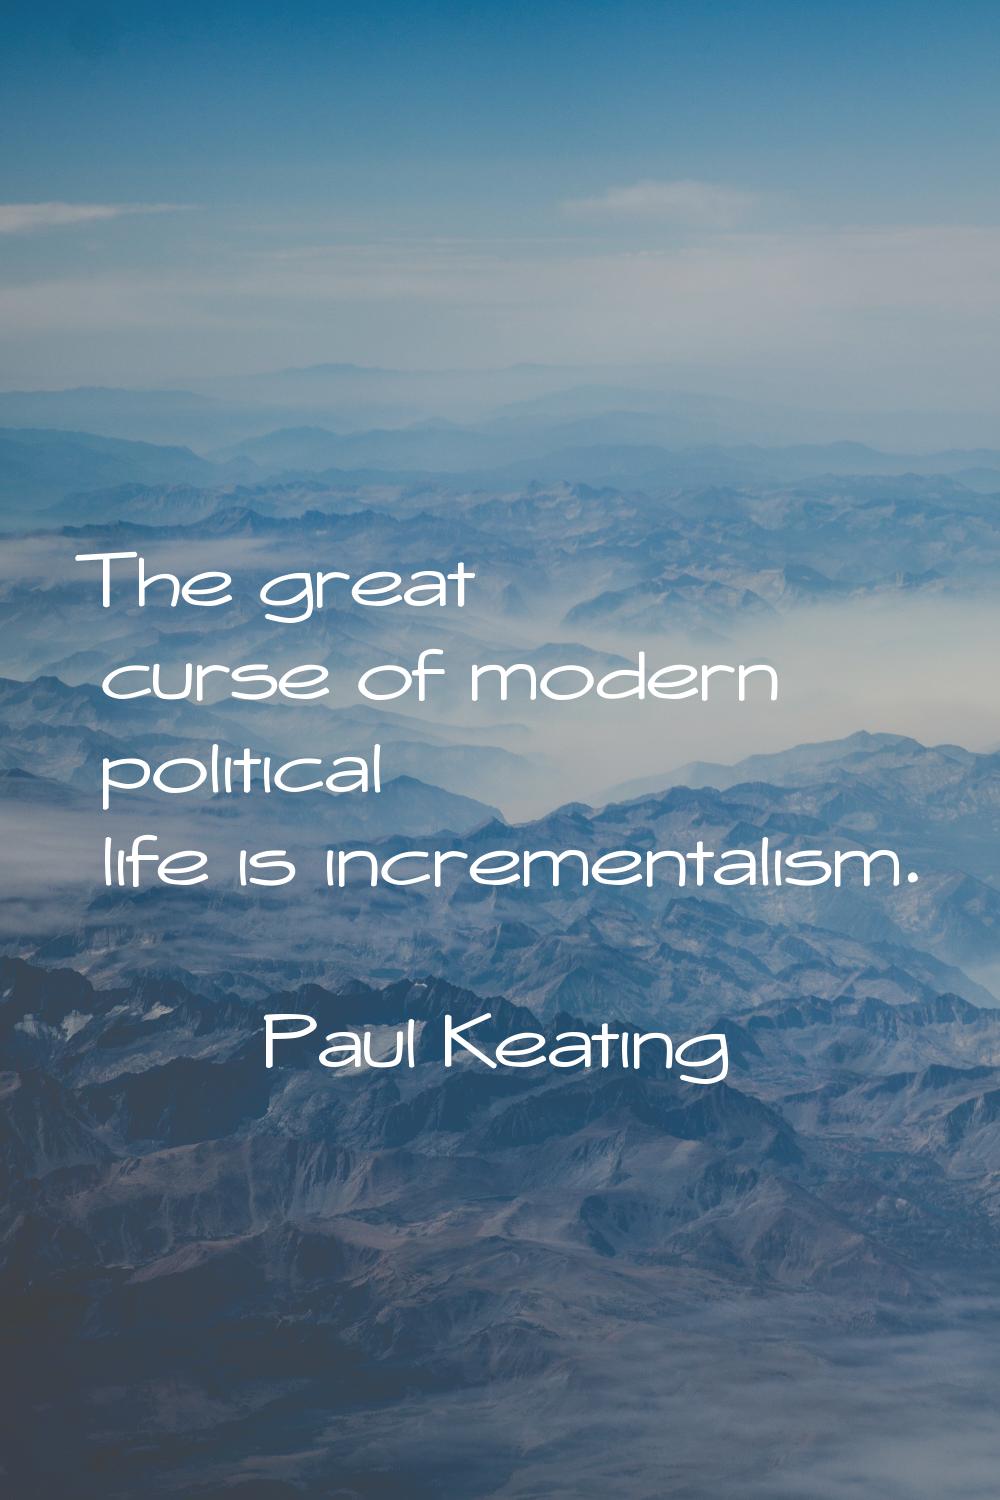 The great curse of modern political life is incrementalism.